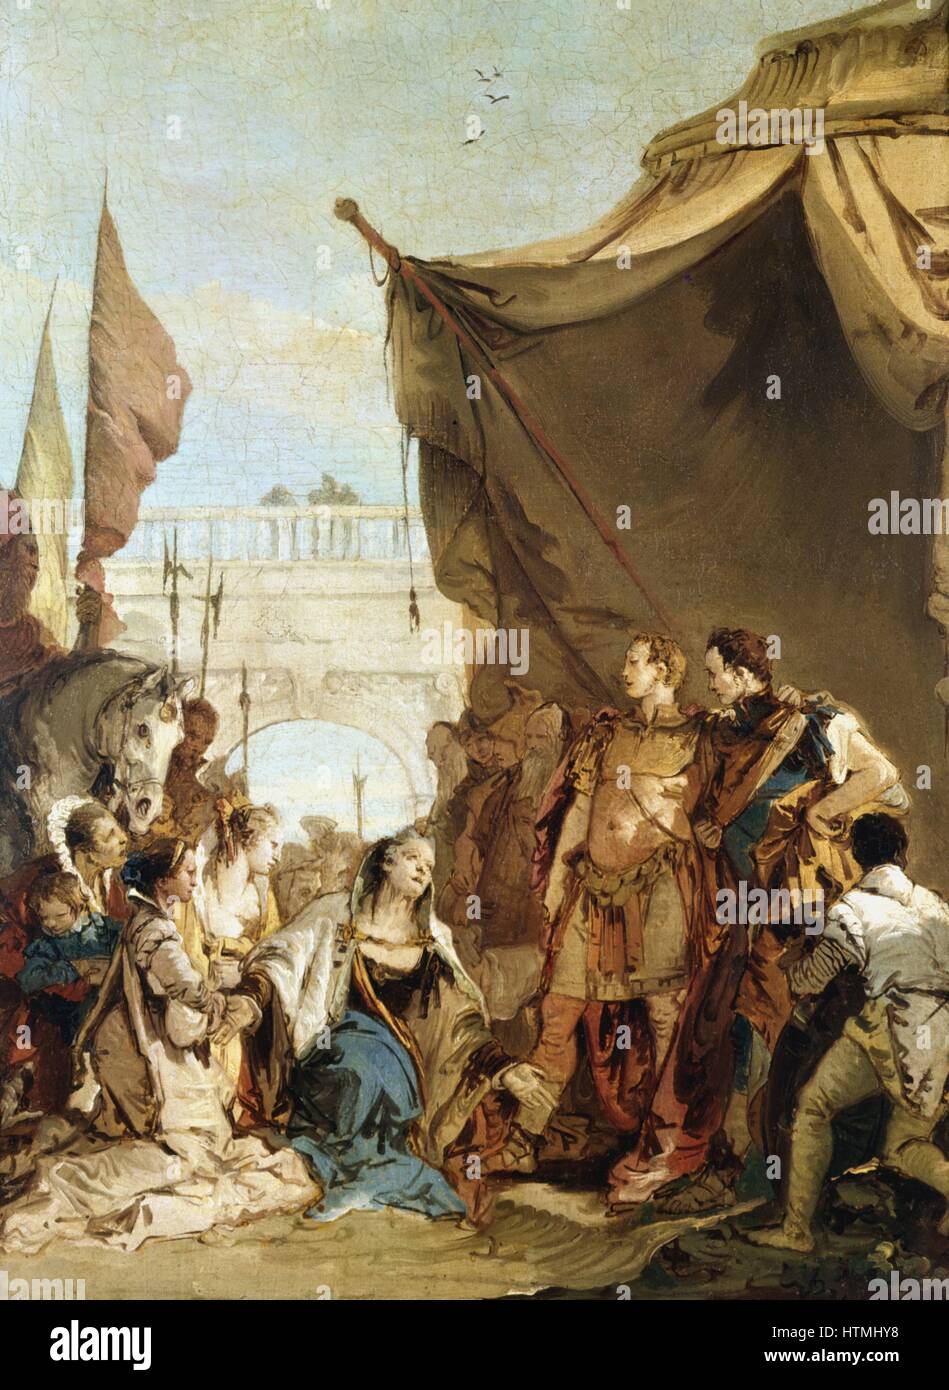 Giovanni Battista Tiepelo (1696-1770) Italian.'Family of Darius before Alexander'. After battle of Issus (333 BC) Darius III's family were at mercy of Alexander the Great who treated them with magnanimity Stock Photo